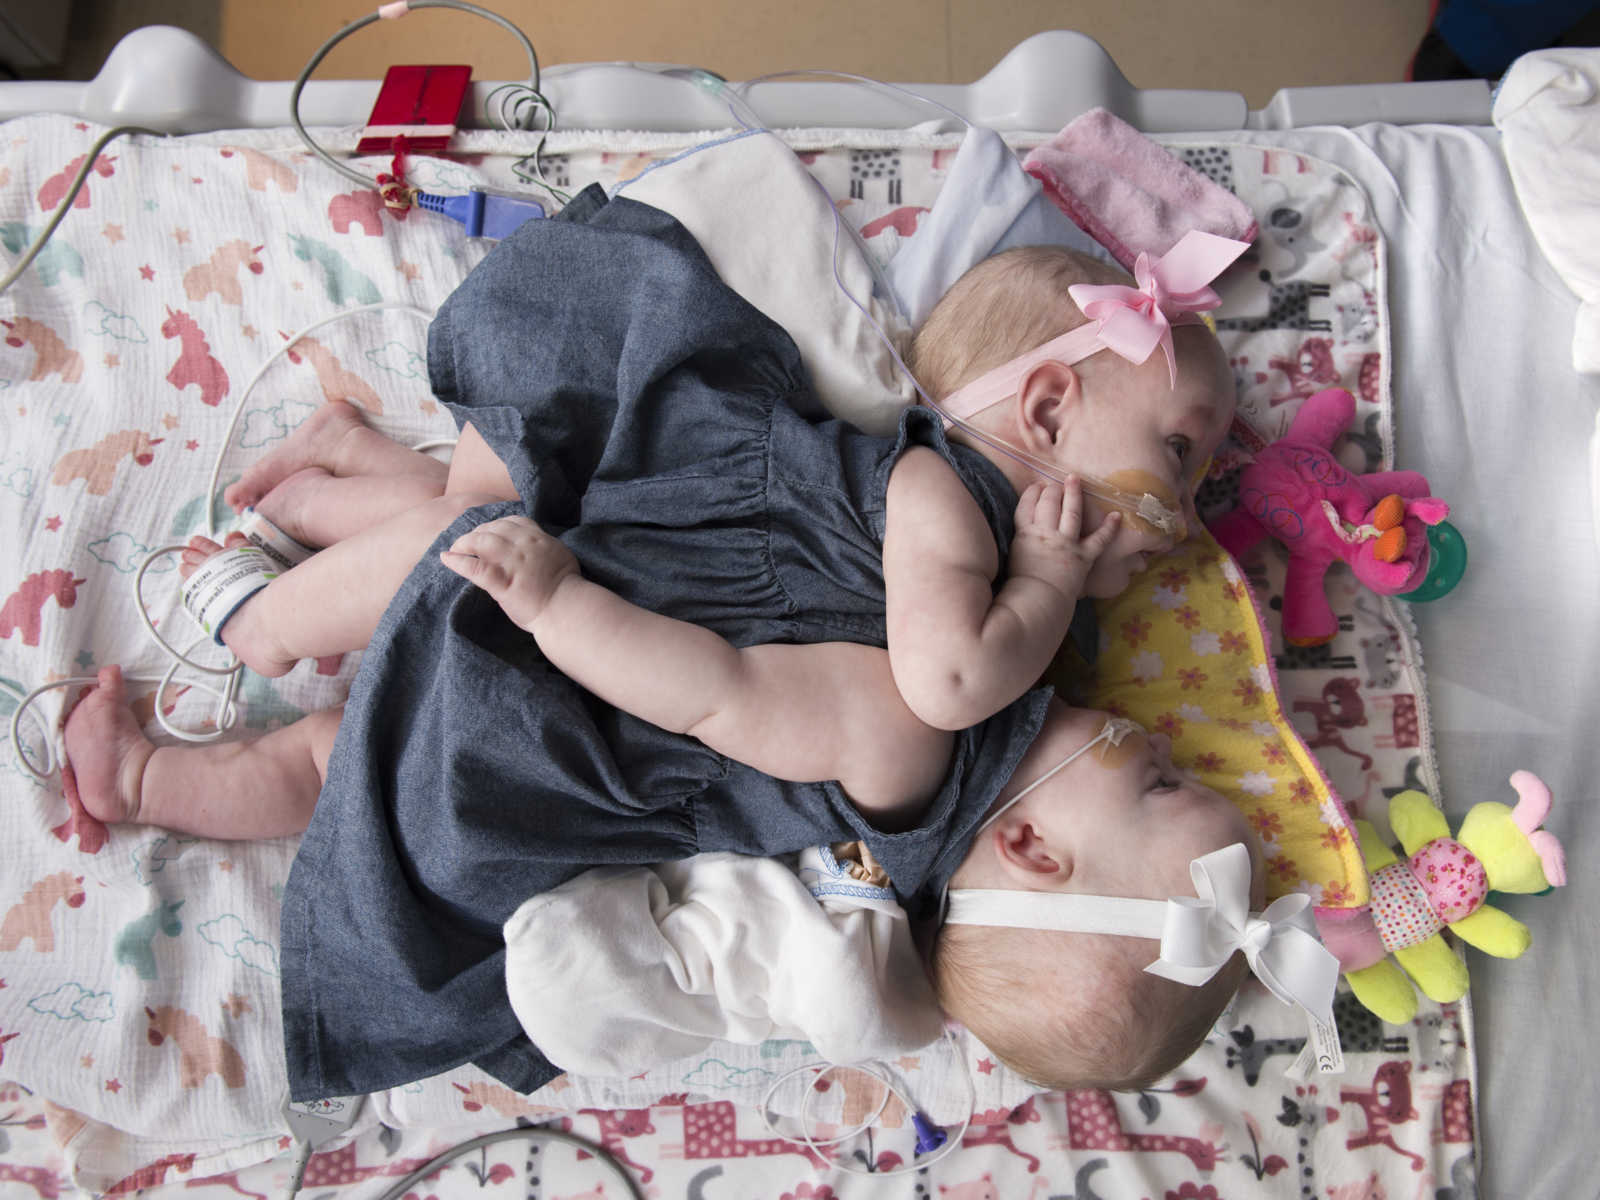 conjoined twin girls in gray dress and headbands lie on baby blanket with toys by their heads